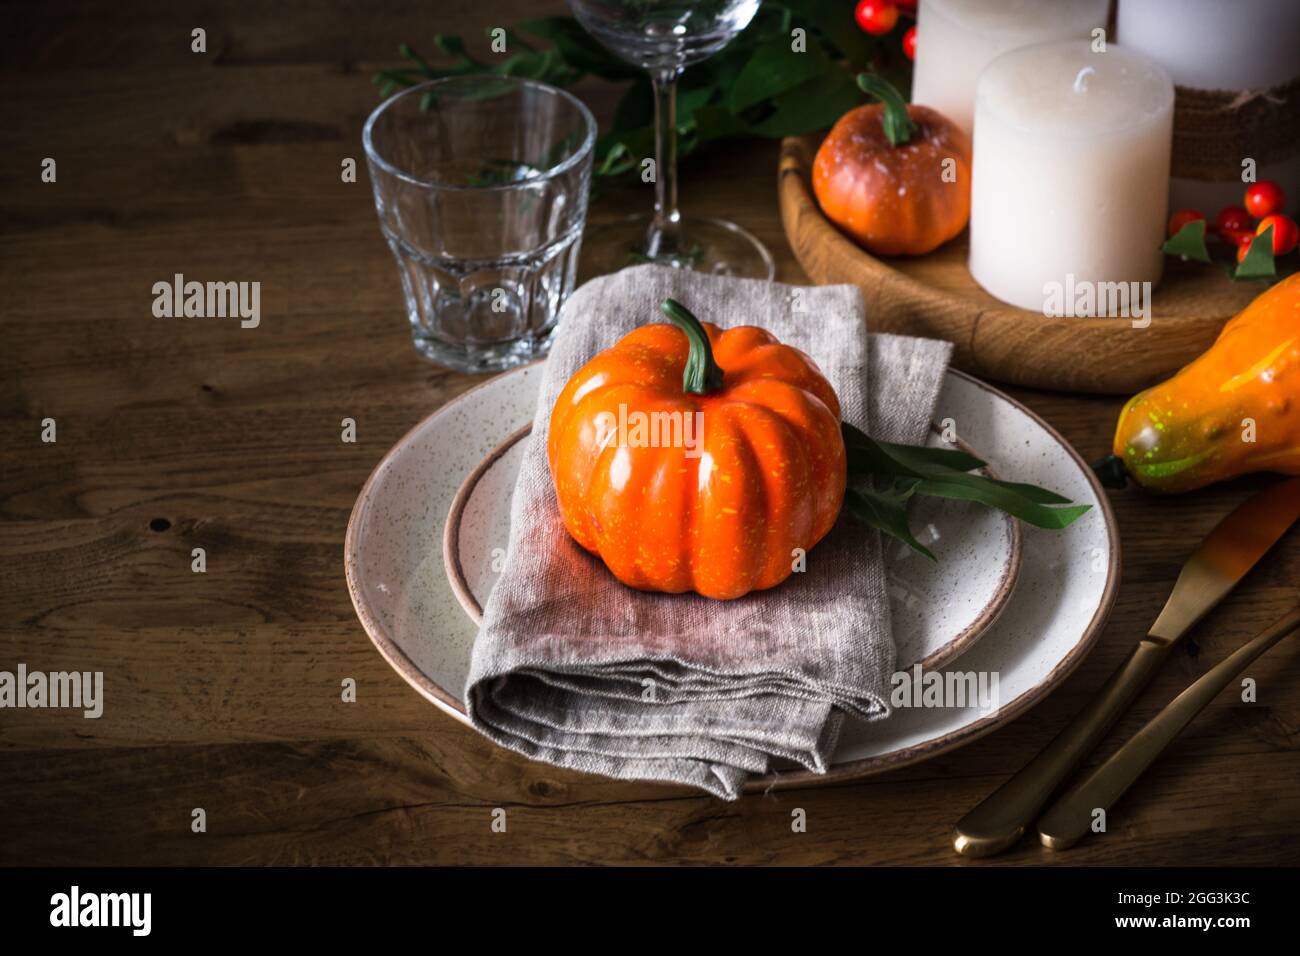 Autumn table setting with plate, pumpkin and candles. Stock Photo